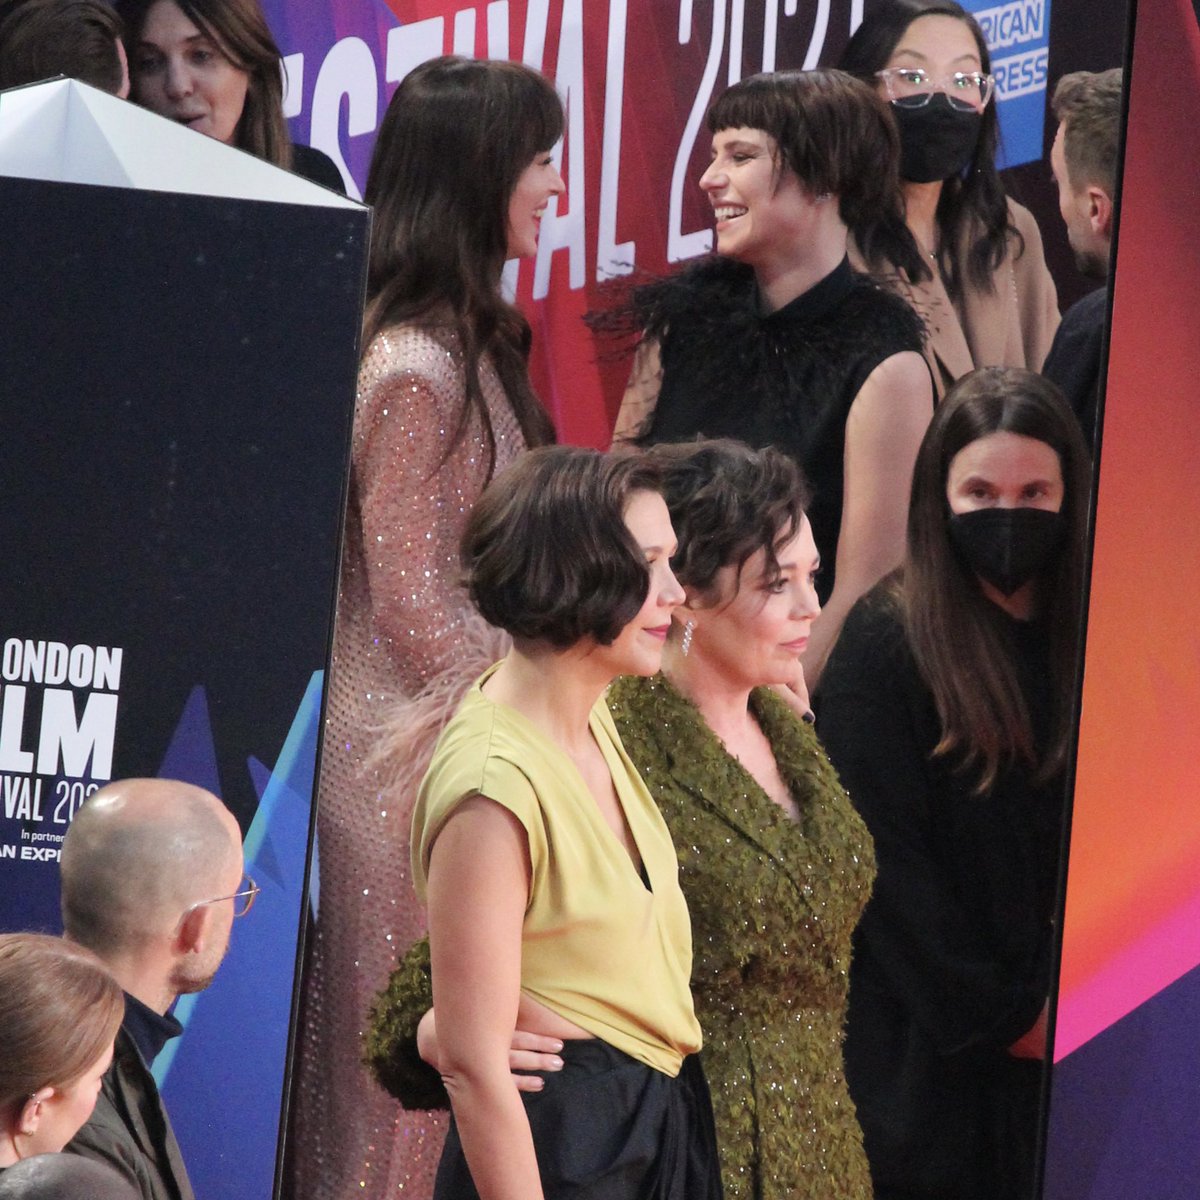 Also in attendance with #OliviaColeman was #DakotaJohnson, #JessieBuckley and #MaggieGyllenhaal. Whilst Olivia and Maggie were posing together it looked like Dakota and Jessie were having a right giggle in the background.